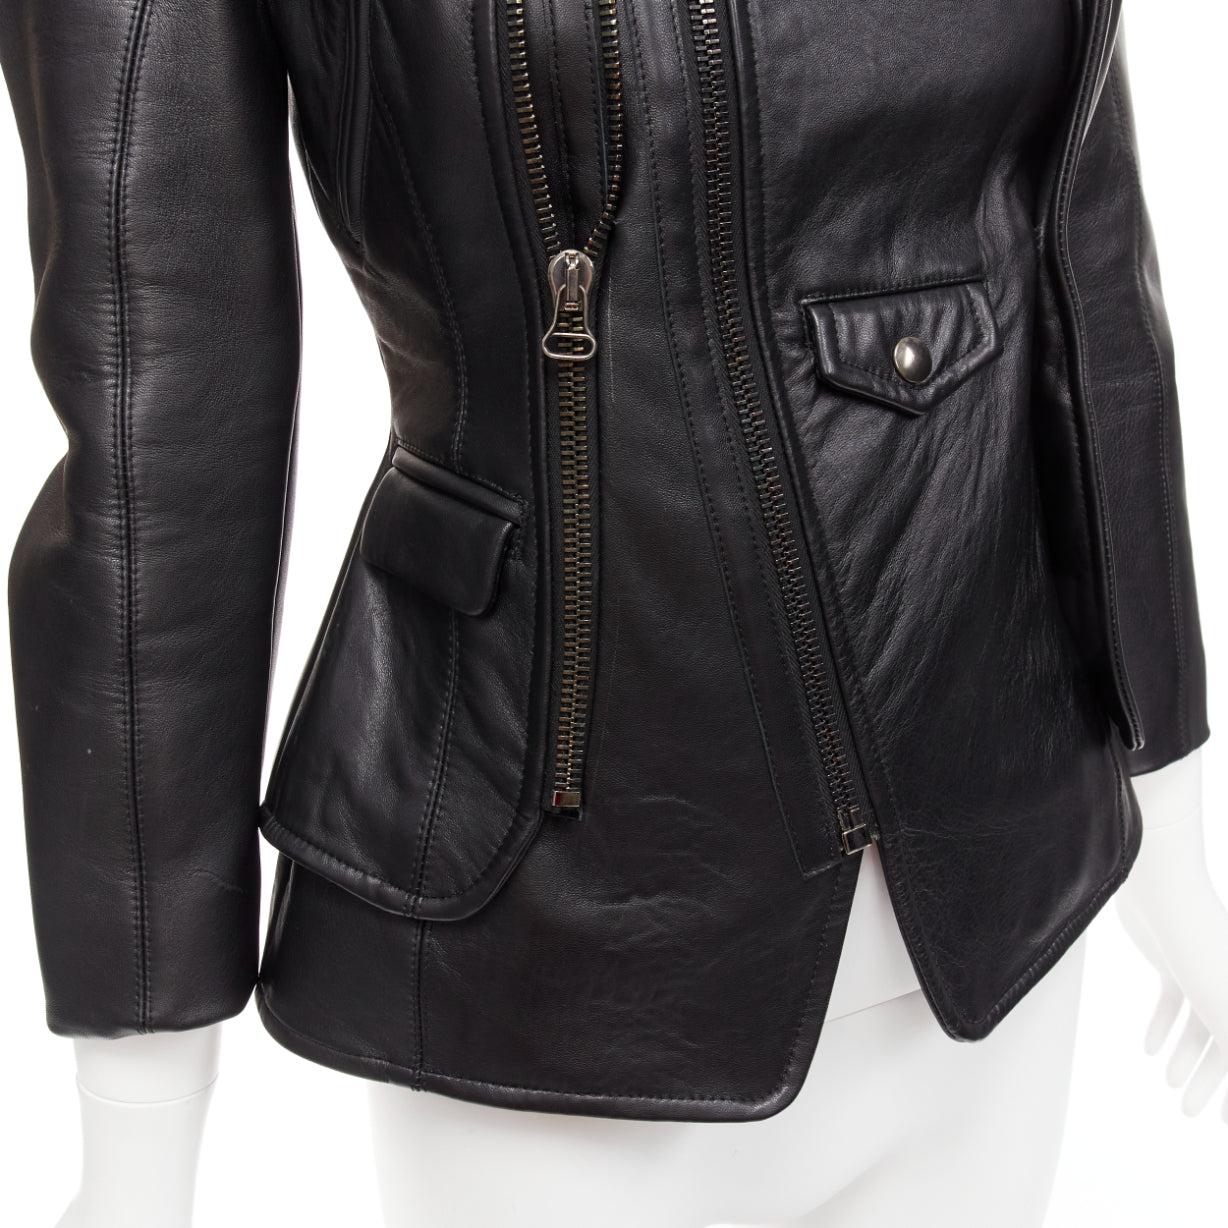 ALTUZARRA black nappa leather double collar deconstructed biker jacket FR34 XS
Reference: SSLG/A00007
Brand: Altuzarra
Material: Leather
Color: Black, Silver
Pattern: Solid
Closure: Zip
Lining: Black Fabric
Extra Details: Stand collar. Single vent.